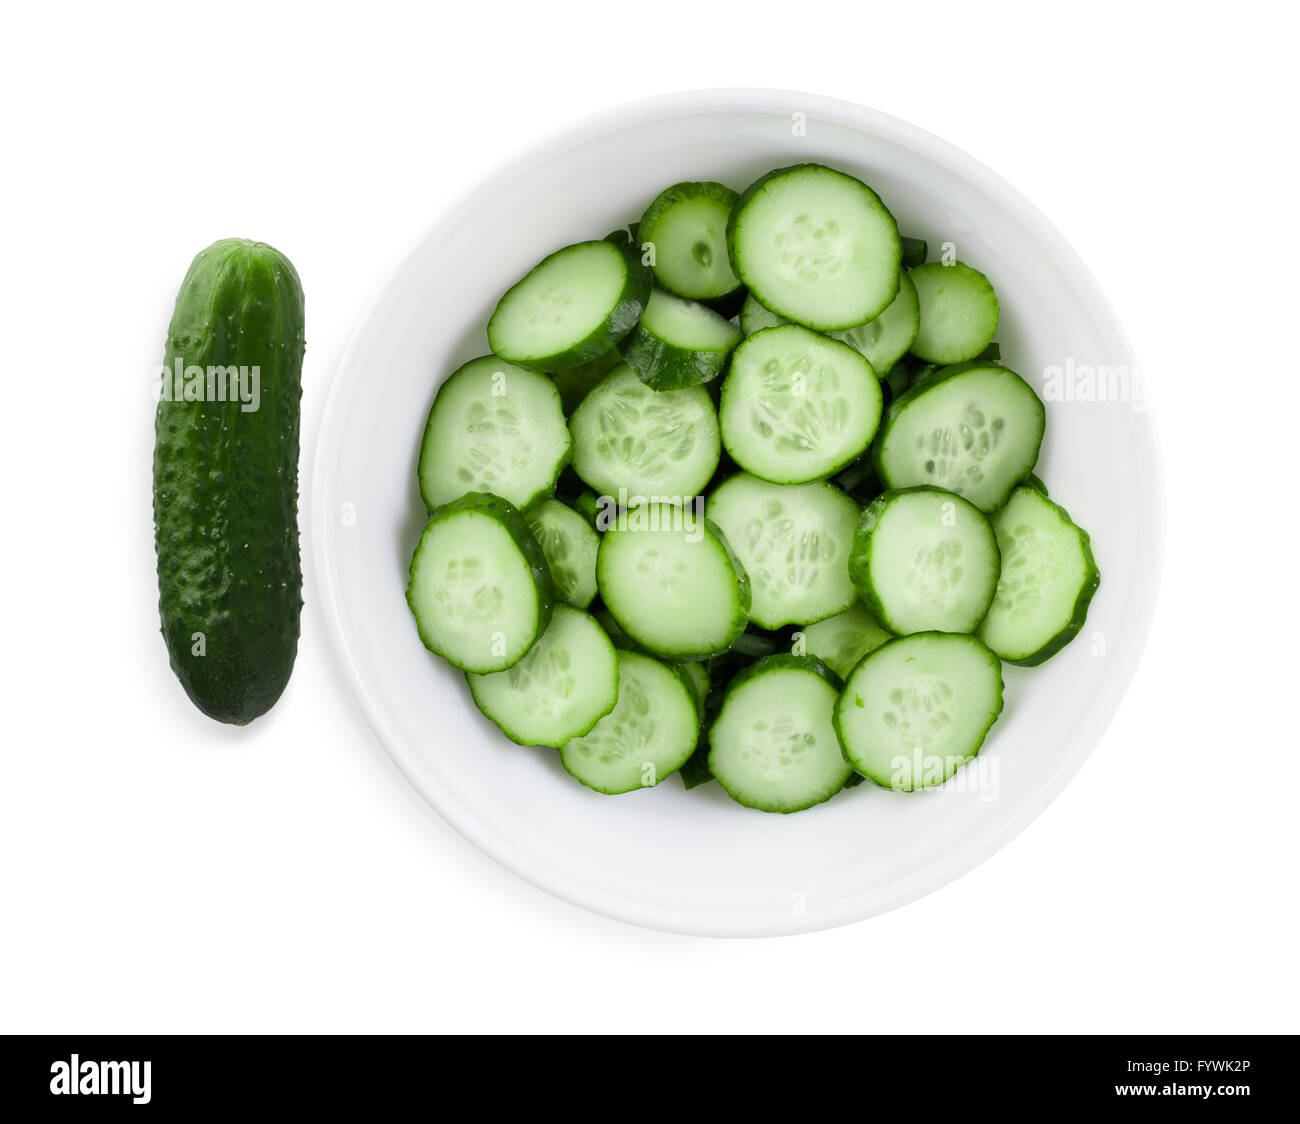 English cucumber cucumbers Cut Out Stock Images & Pictures - Alamy